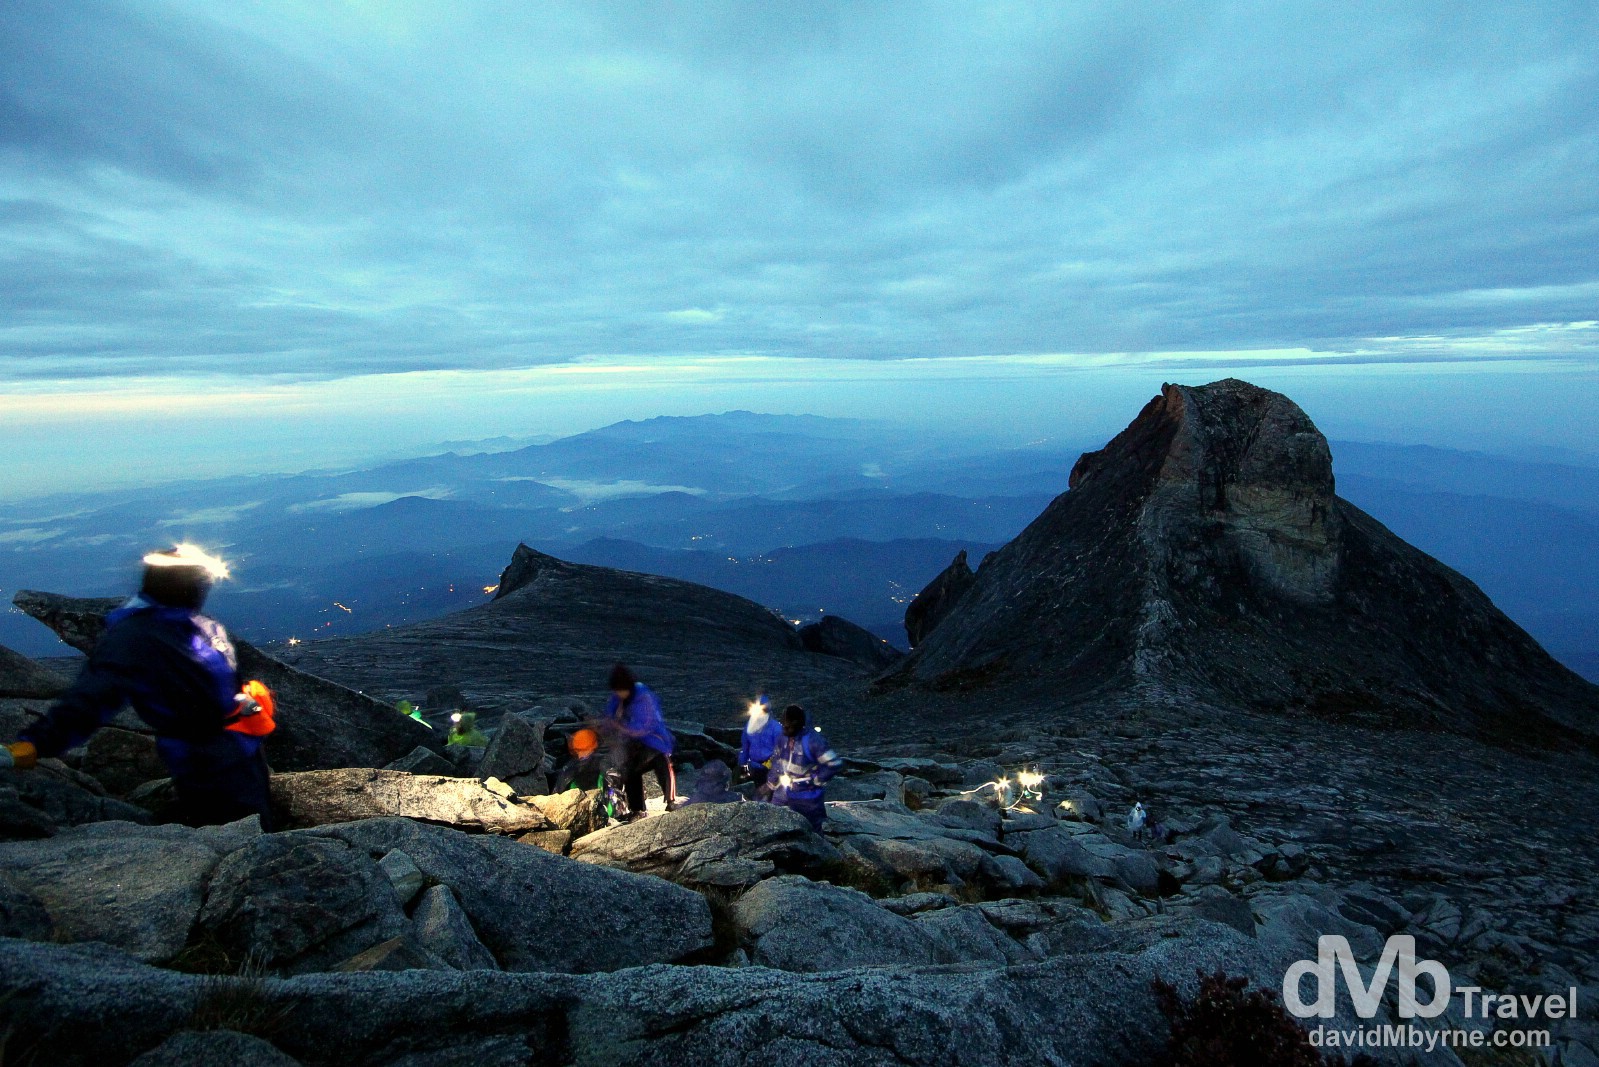 Climbers approaching the 4,095m (13,435ft) summit of Mount Kinabalu, the highest point on Borneo, the world's third largest island. Sabah, Malaysian Borneo. June 23rd 2012